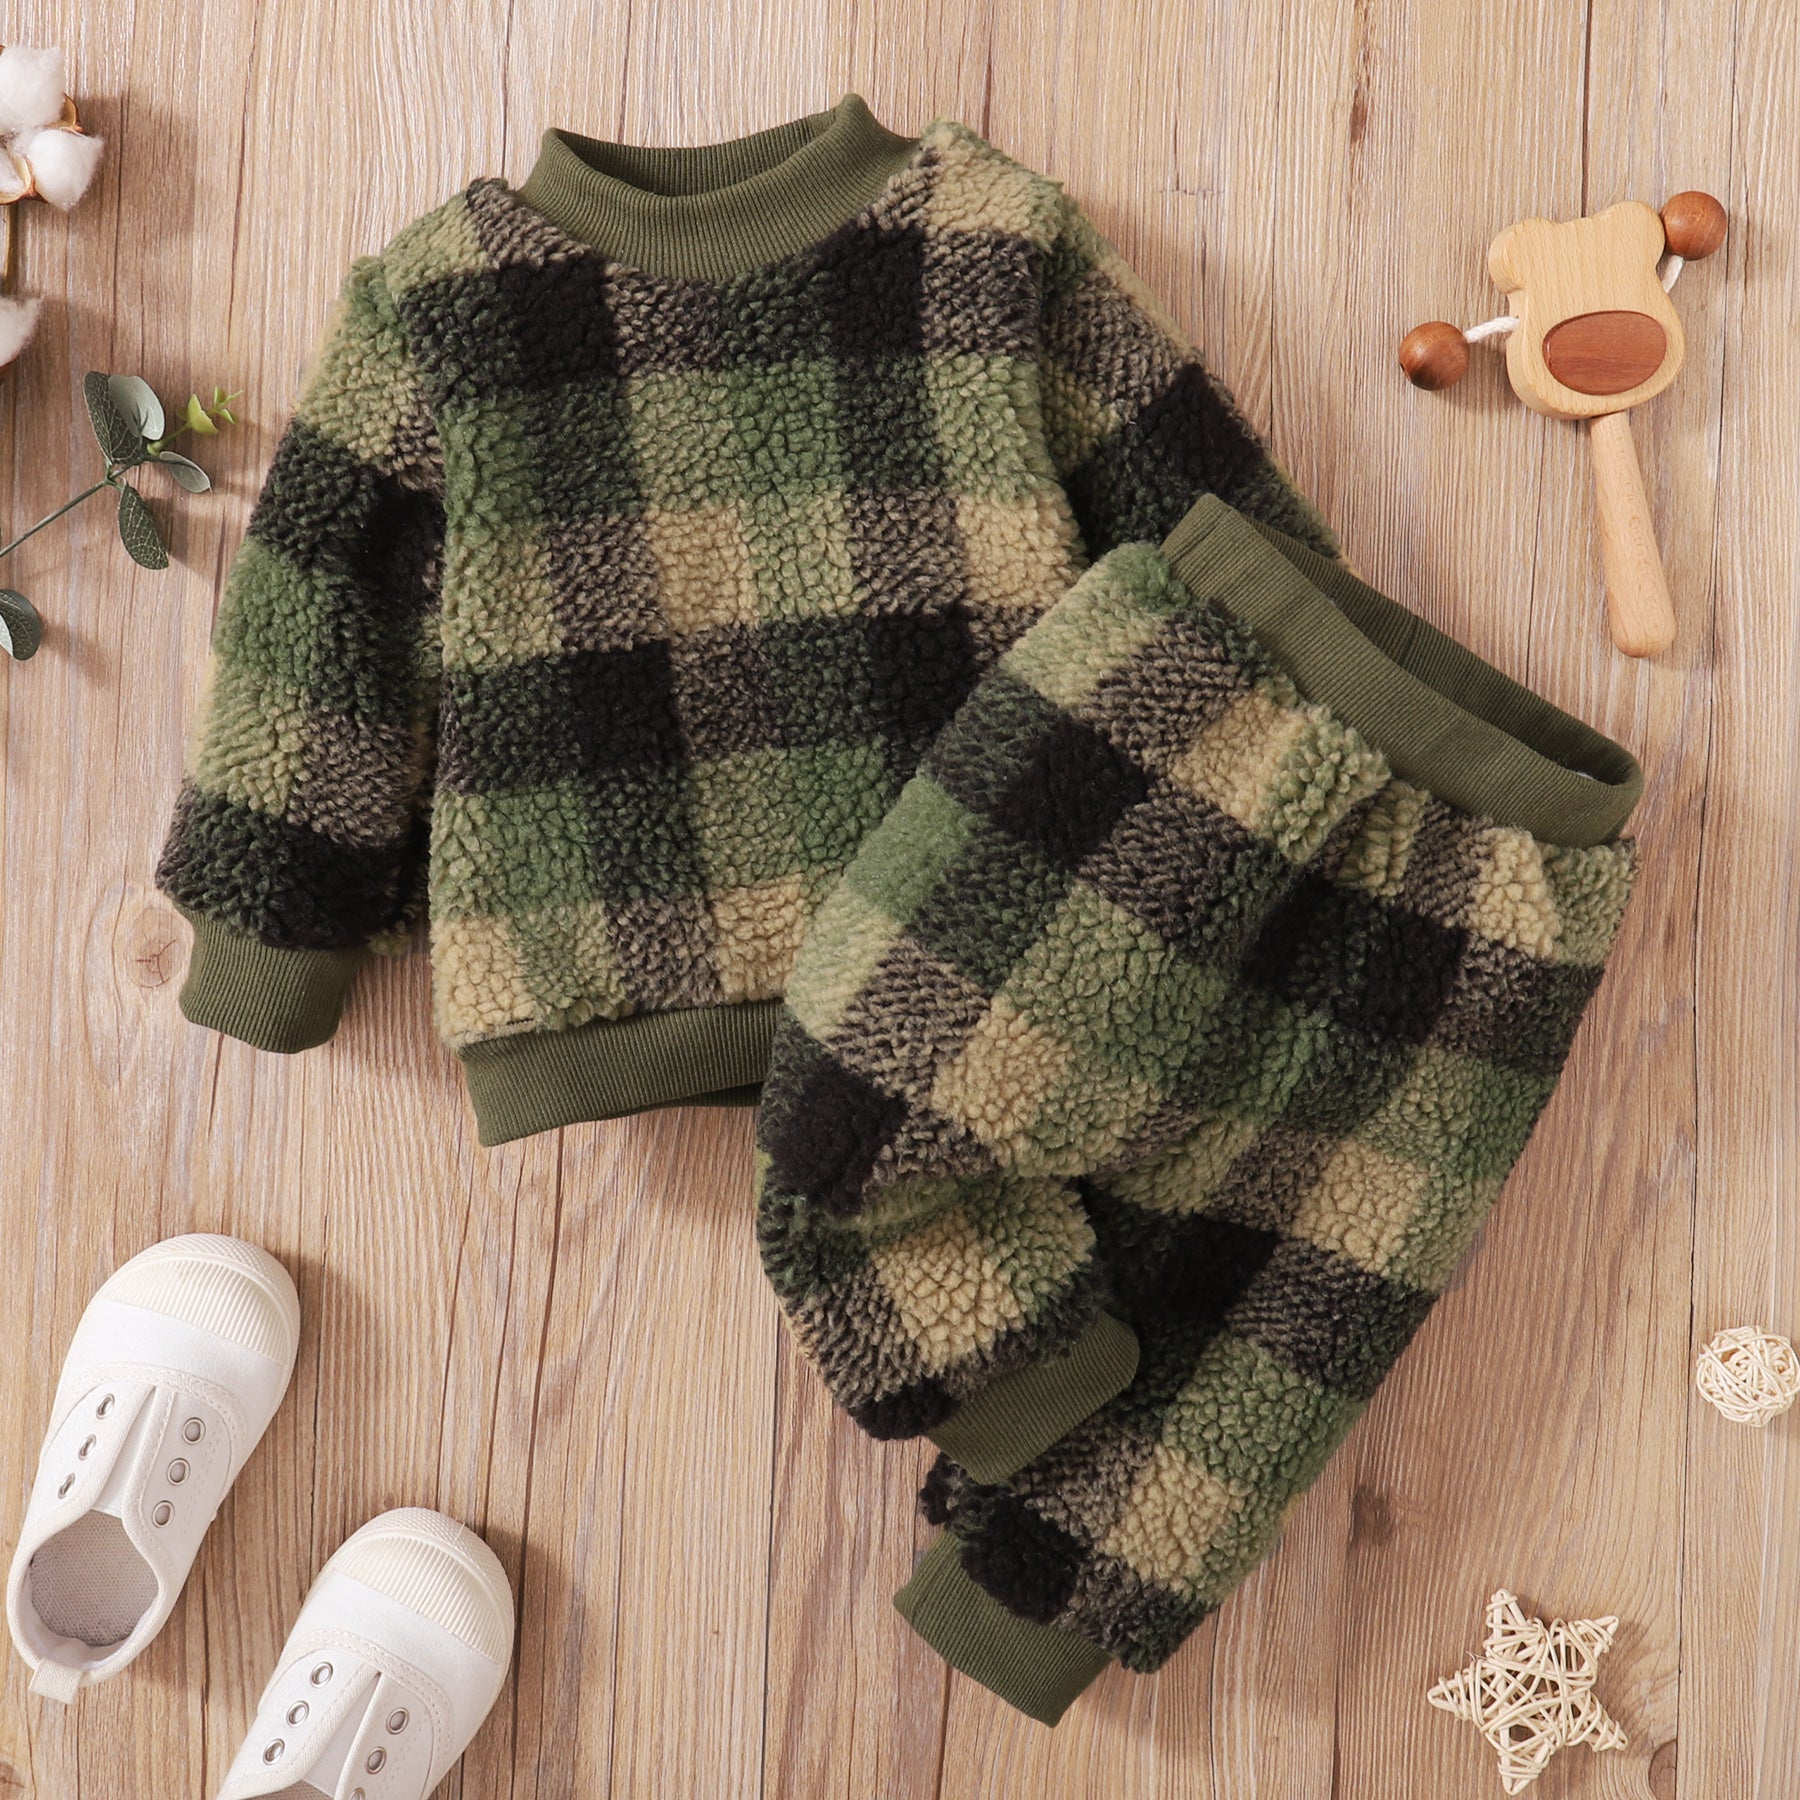 2-piece Toddler Boy Plaid Fuzzy Pullover Sweatshirt and Pants Set